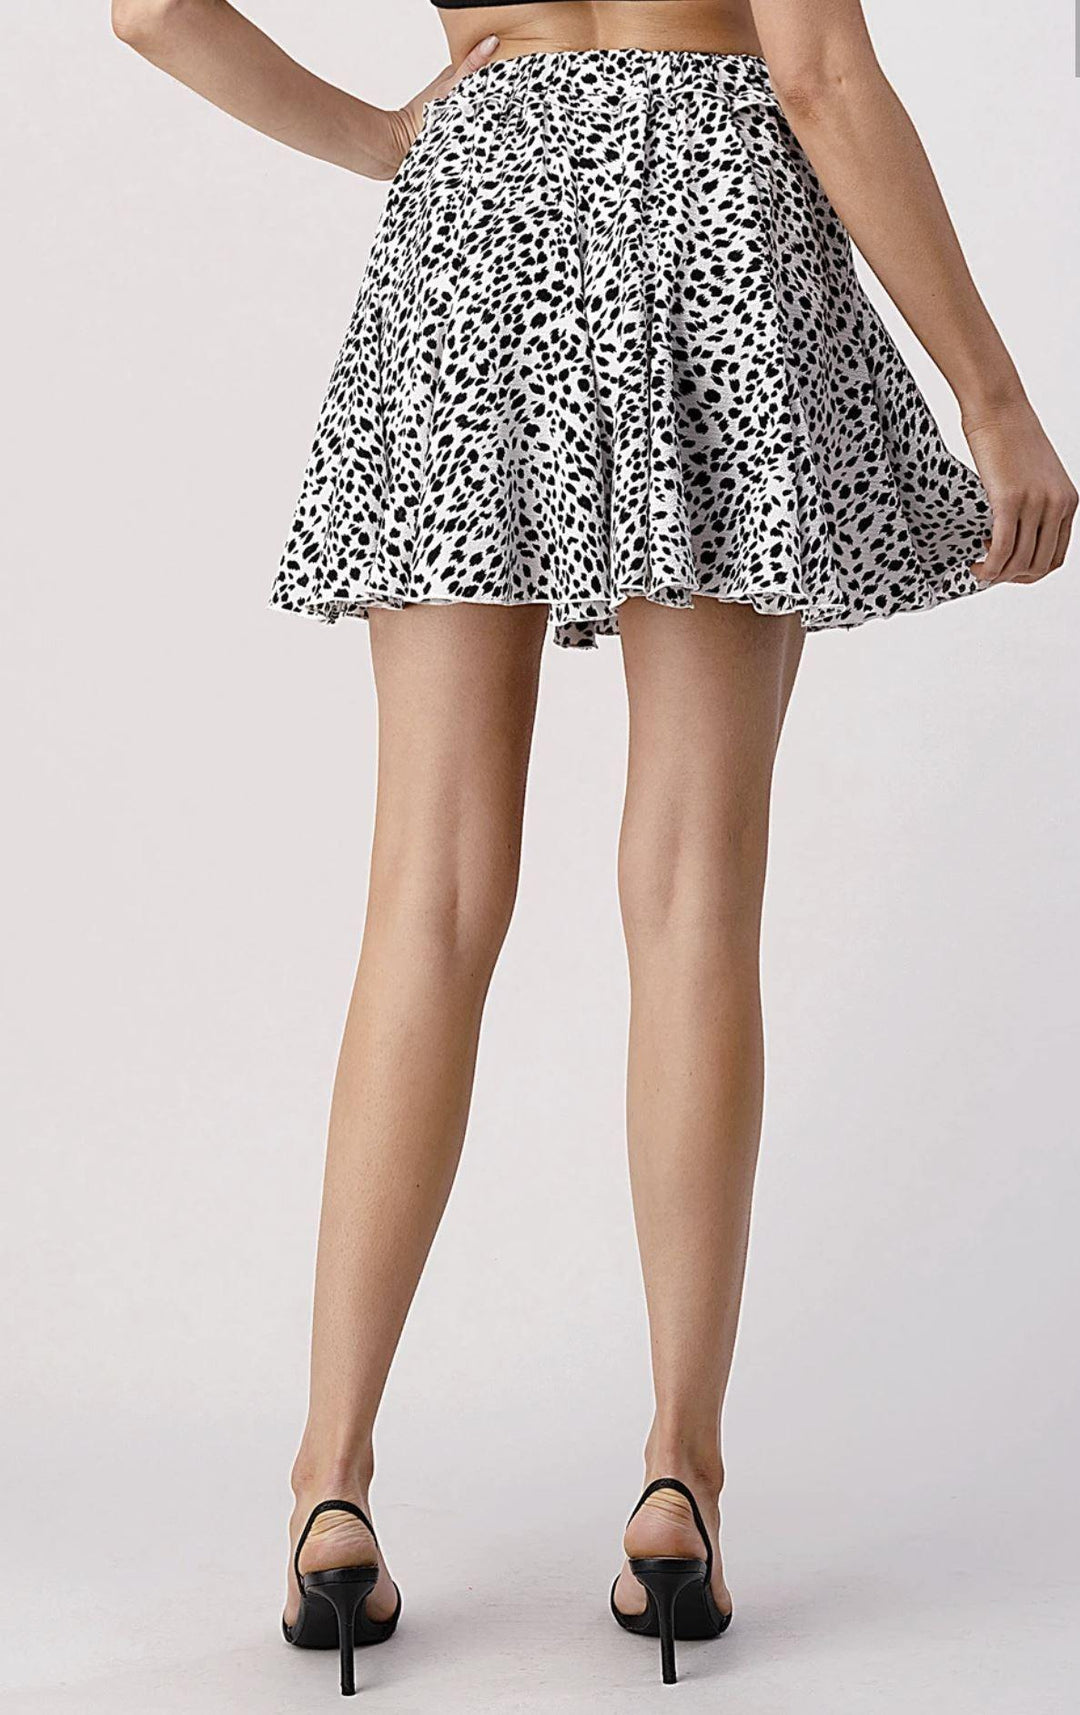 Brand: Pixi and Ivy - Black and White Animal Print Flare Mini Skirt -  Animal Print, Best Dressed, Black, Featured, Flare Skirt, Made in America, made in usa, Mini Skirt, Pattern, Skirt, Spring, Summer, vacation, Women - Classy Cozy Cool Boutique